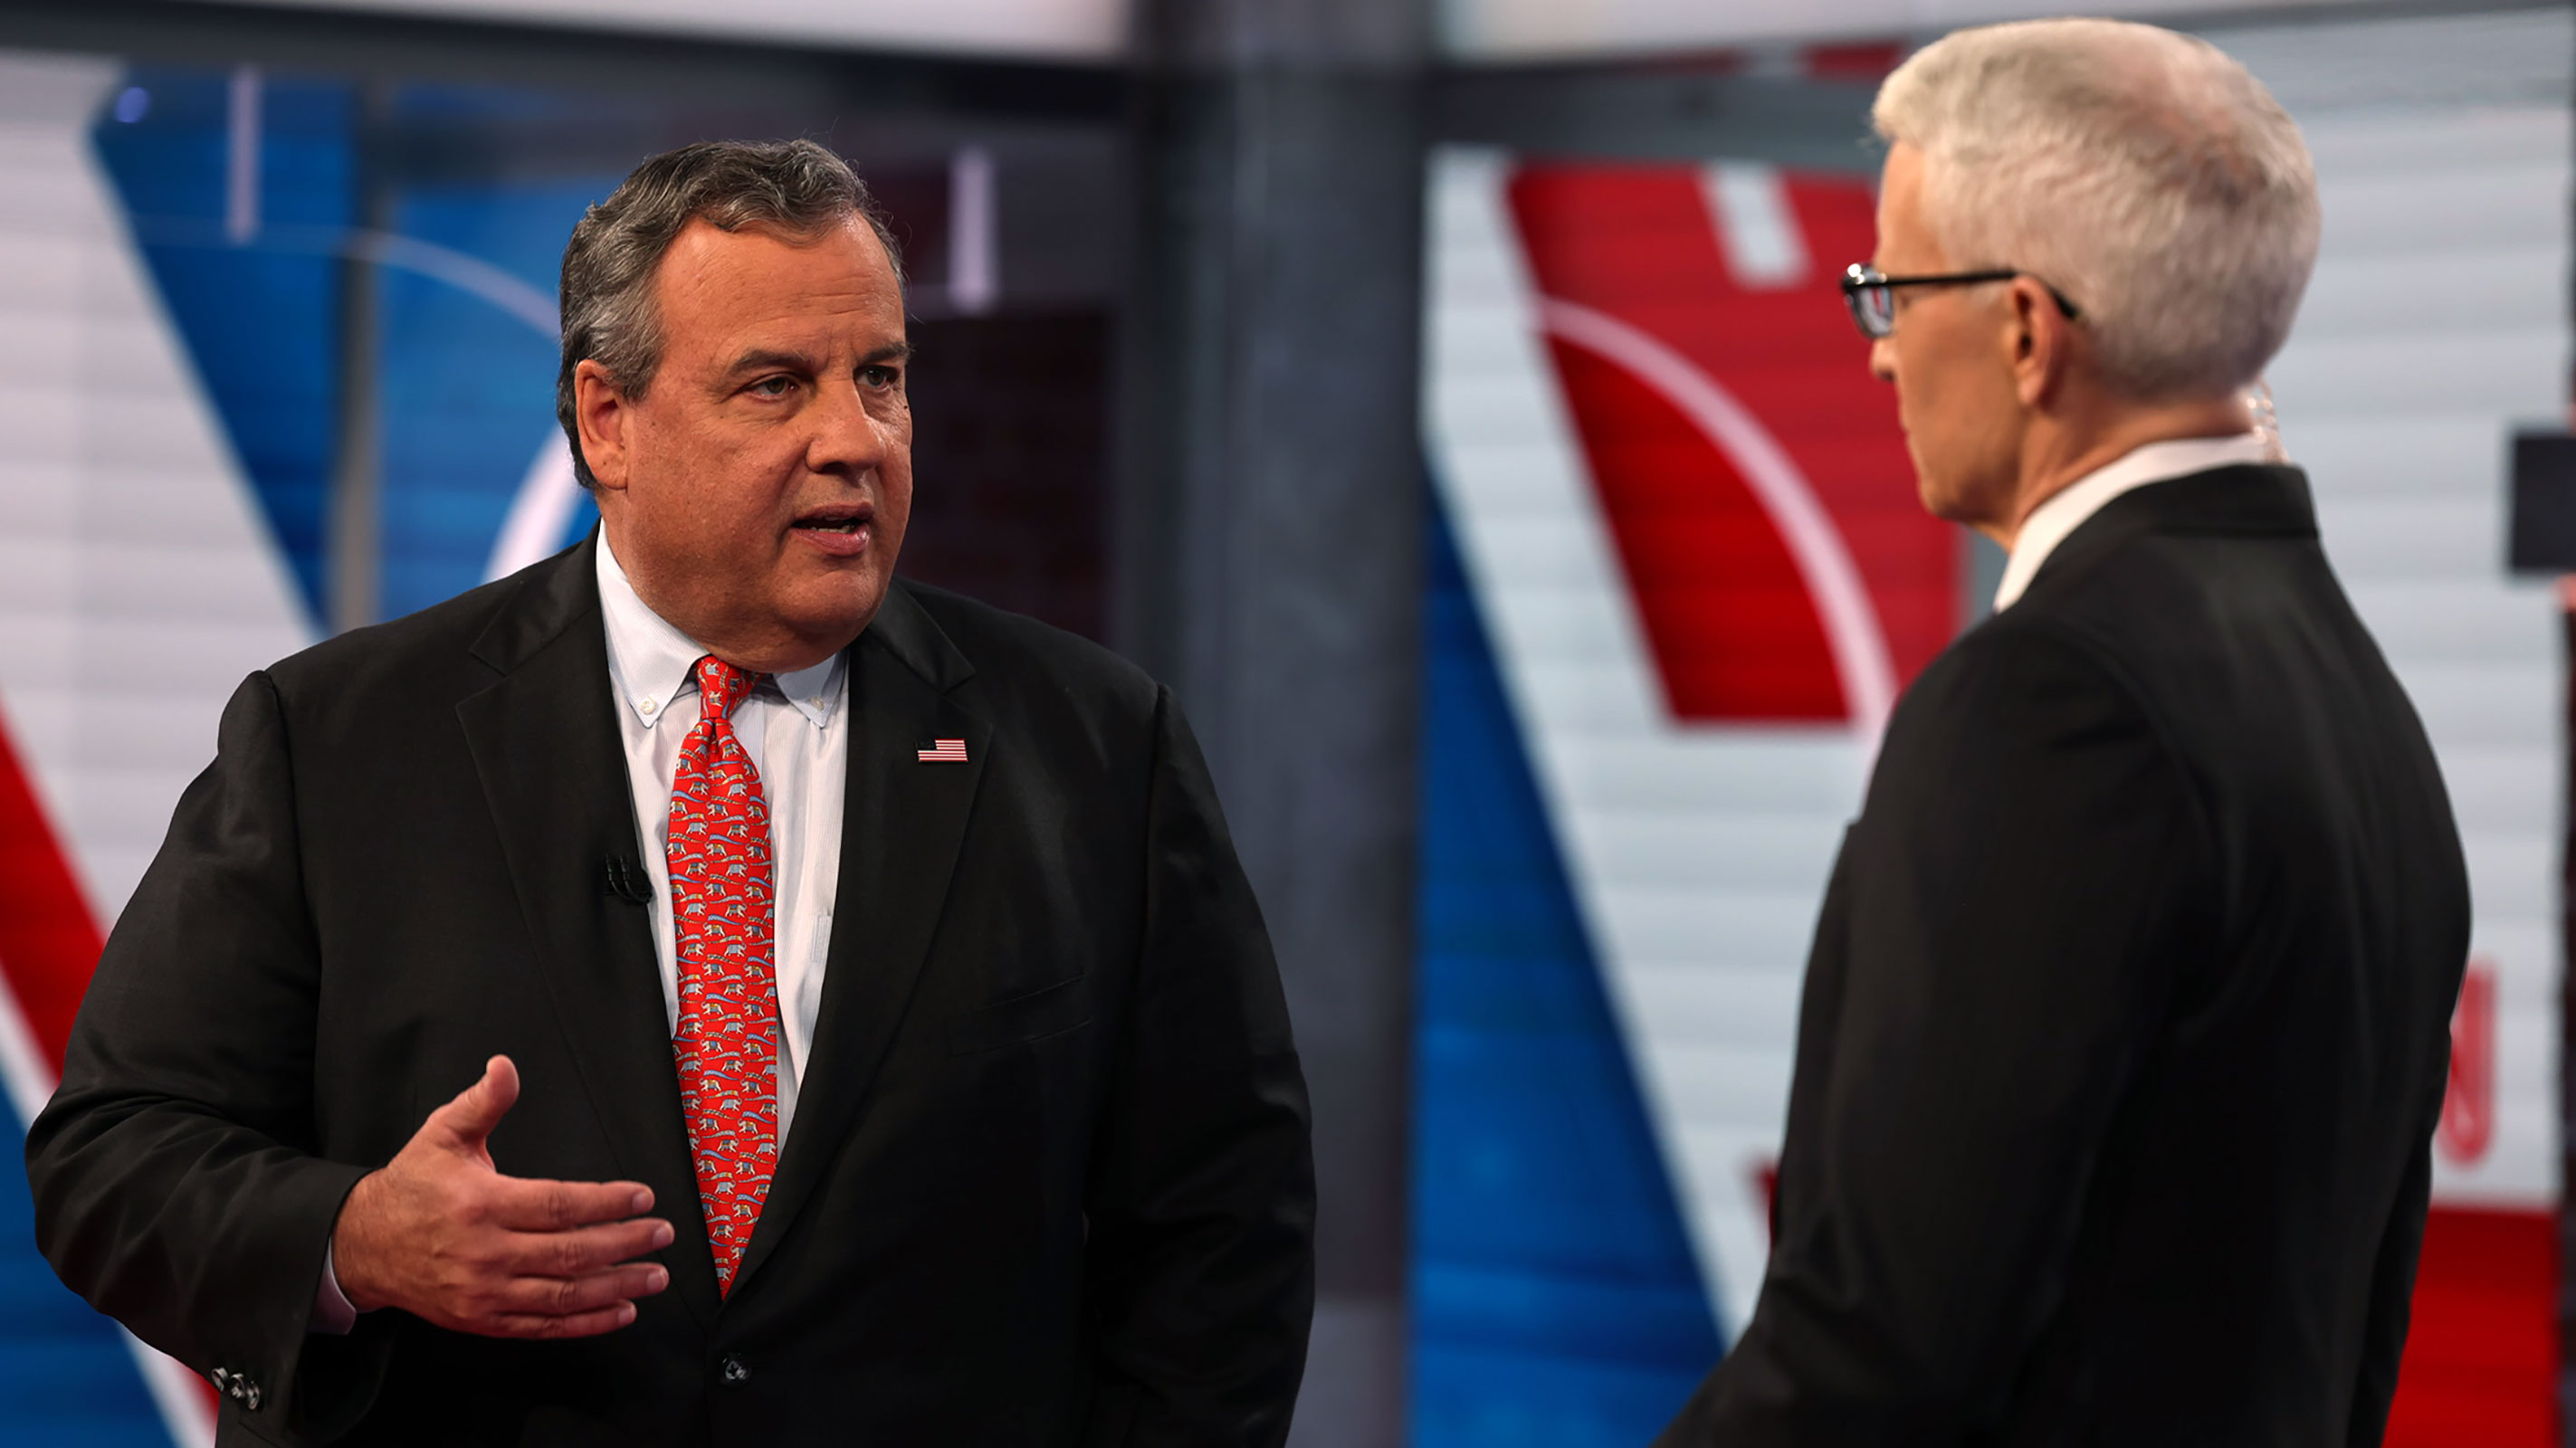 Chris Christie speaks during a CNN Republican Presidential Town Hall moderated by CNN’s Anderson Cooper in New York on Monday, June 12.